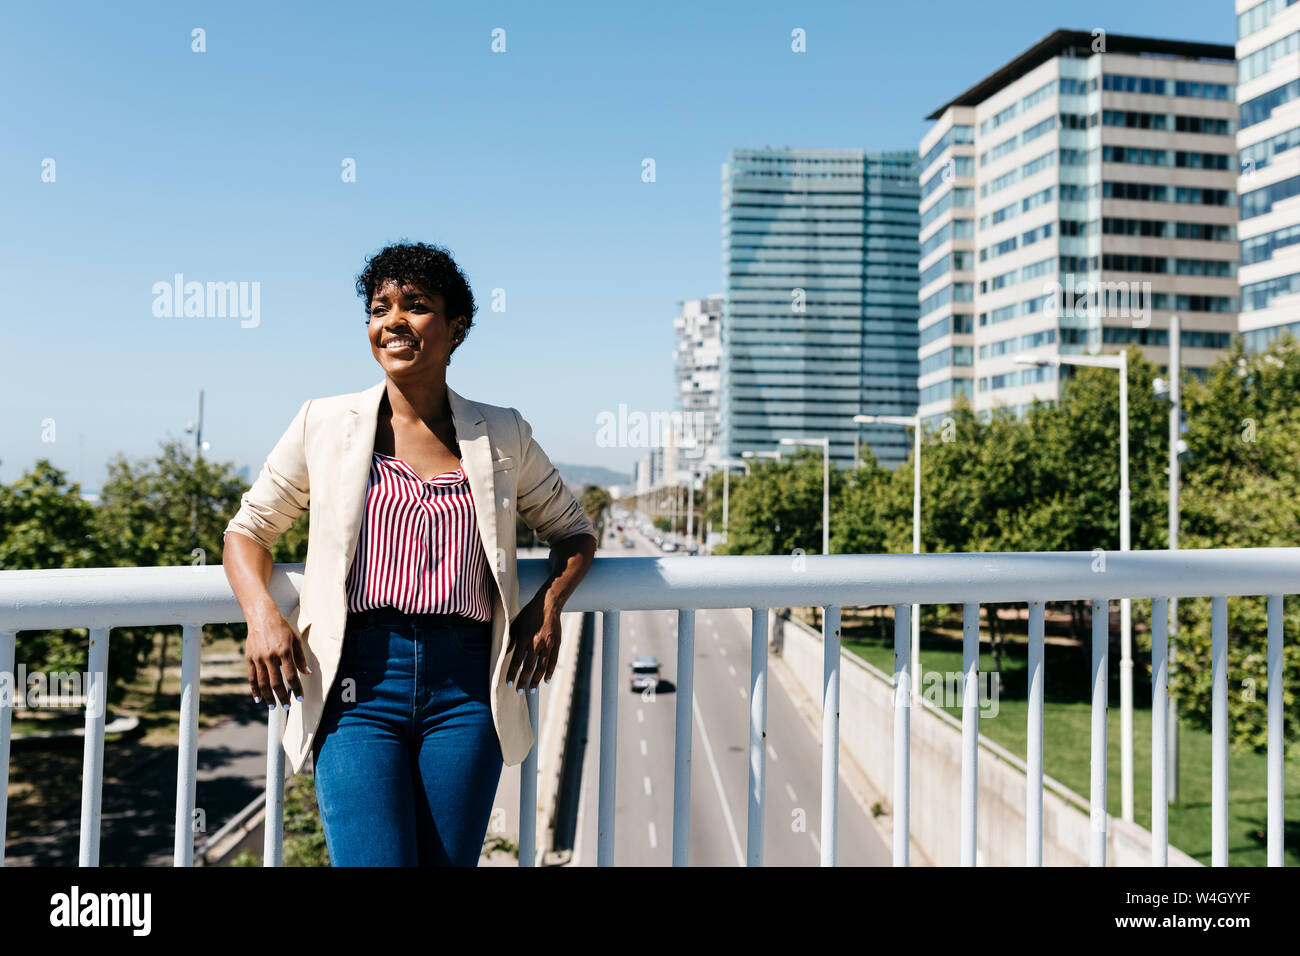 Smiling businesswoman leaning on a bridge railing, office buildings in the background Stock Photo